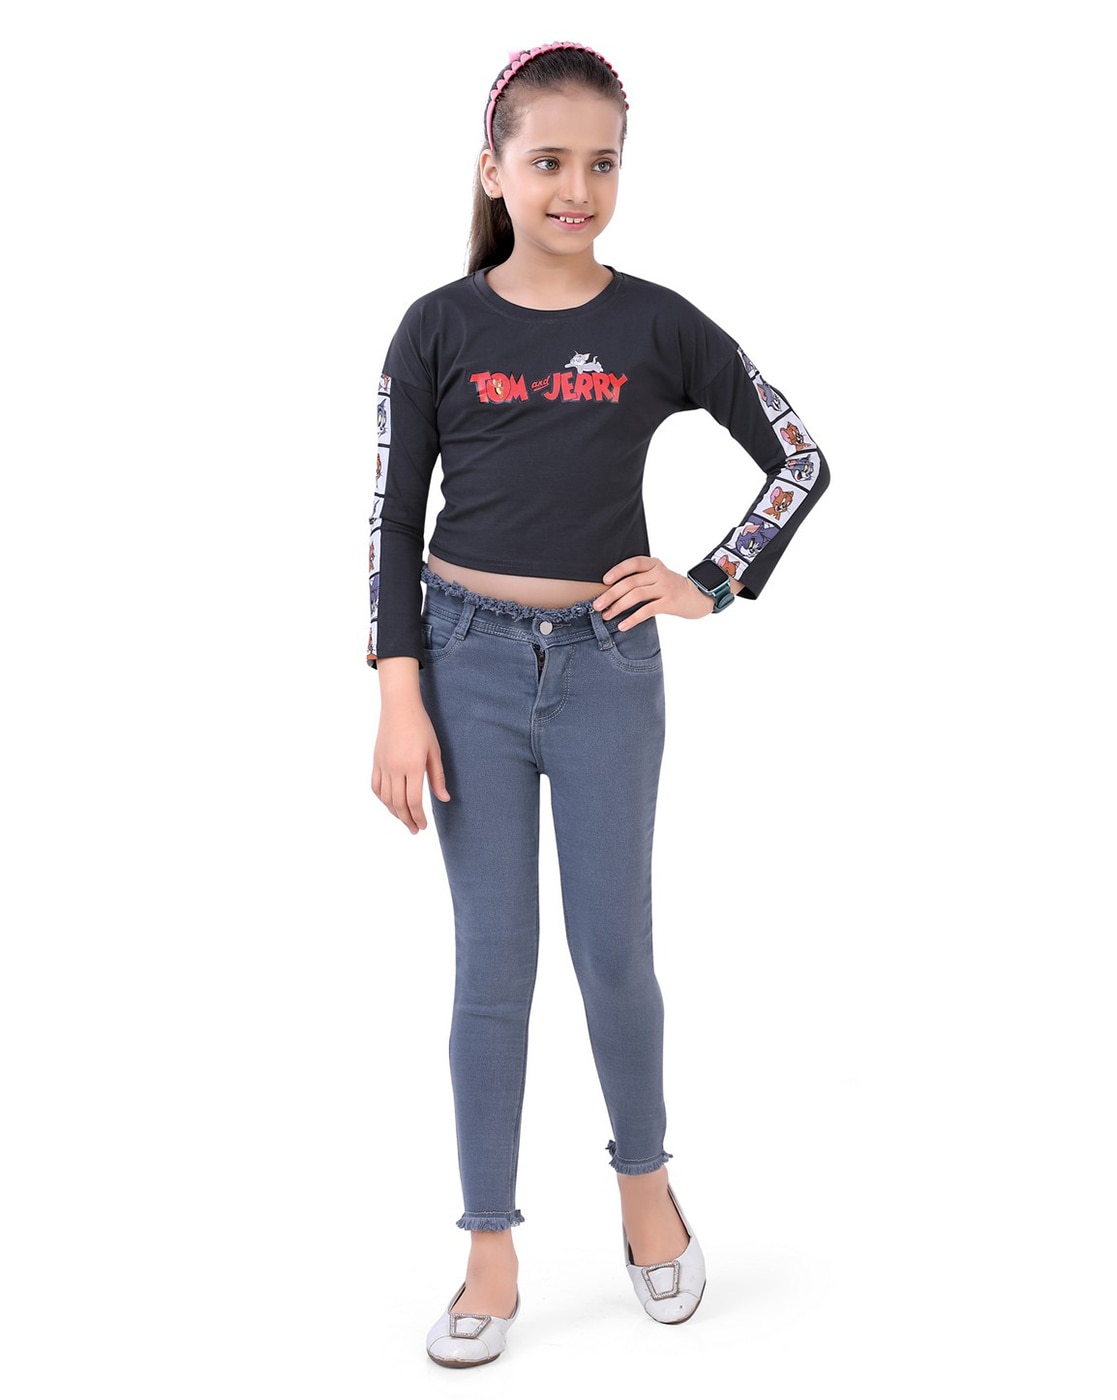 Buy FITG18 Womens  Girls Slim Fit Trackpants Jeans  JeggingWhite   RedFree Size at Amazonin